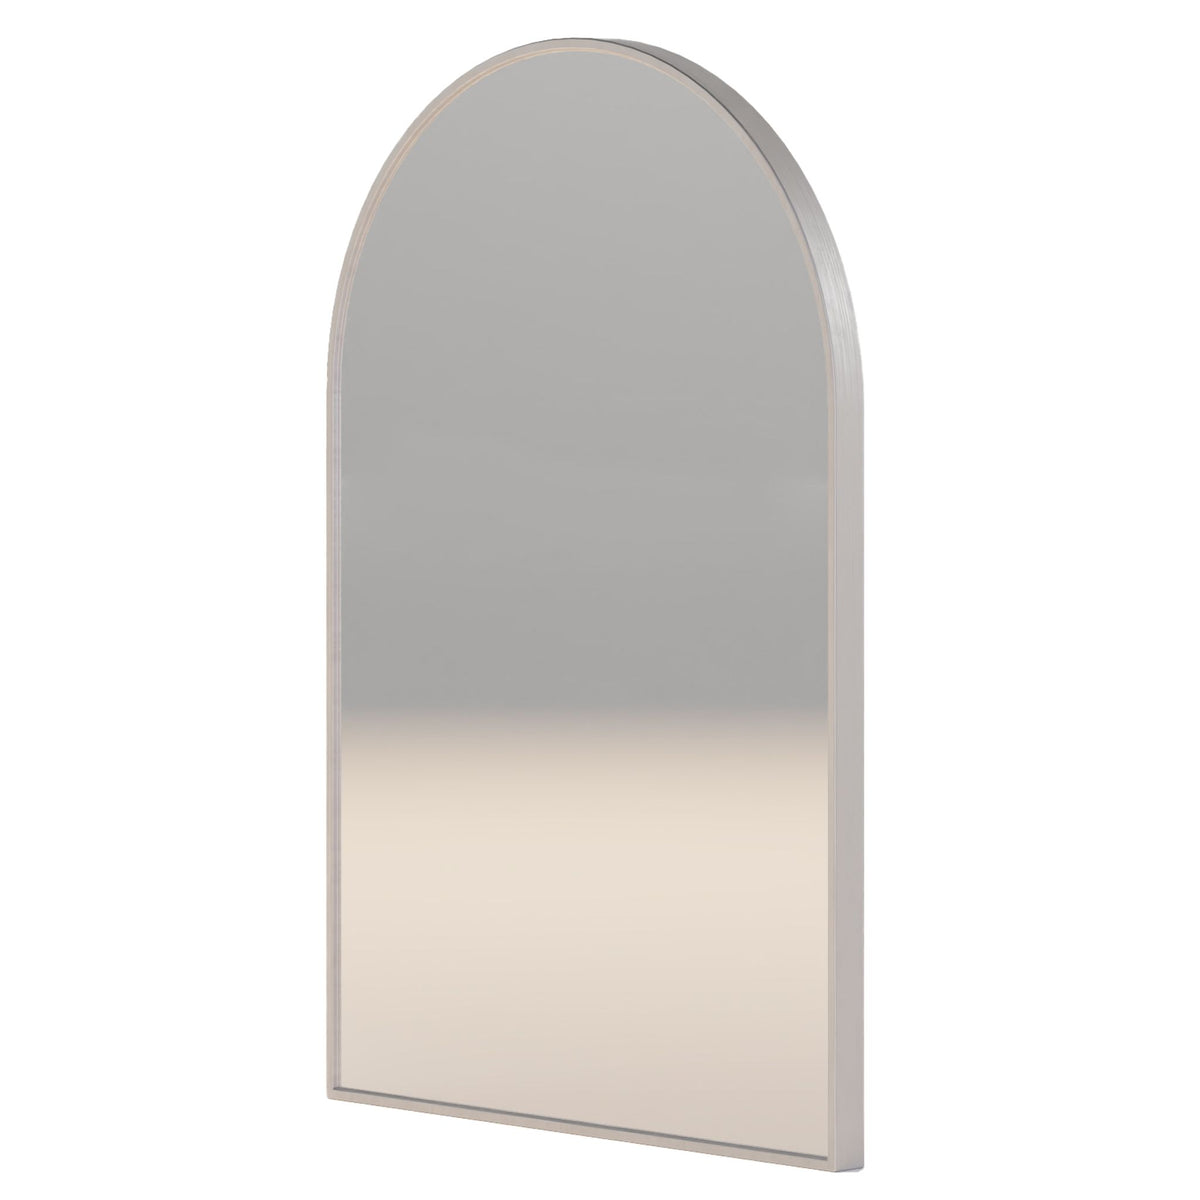 Cortesi Home Lucy Arched Mirror with Brushed Silver Aluminum Frame, 20x30